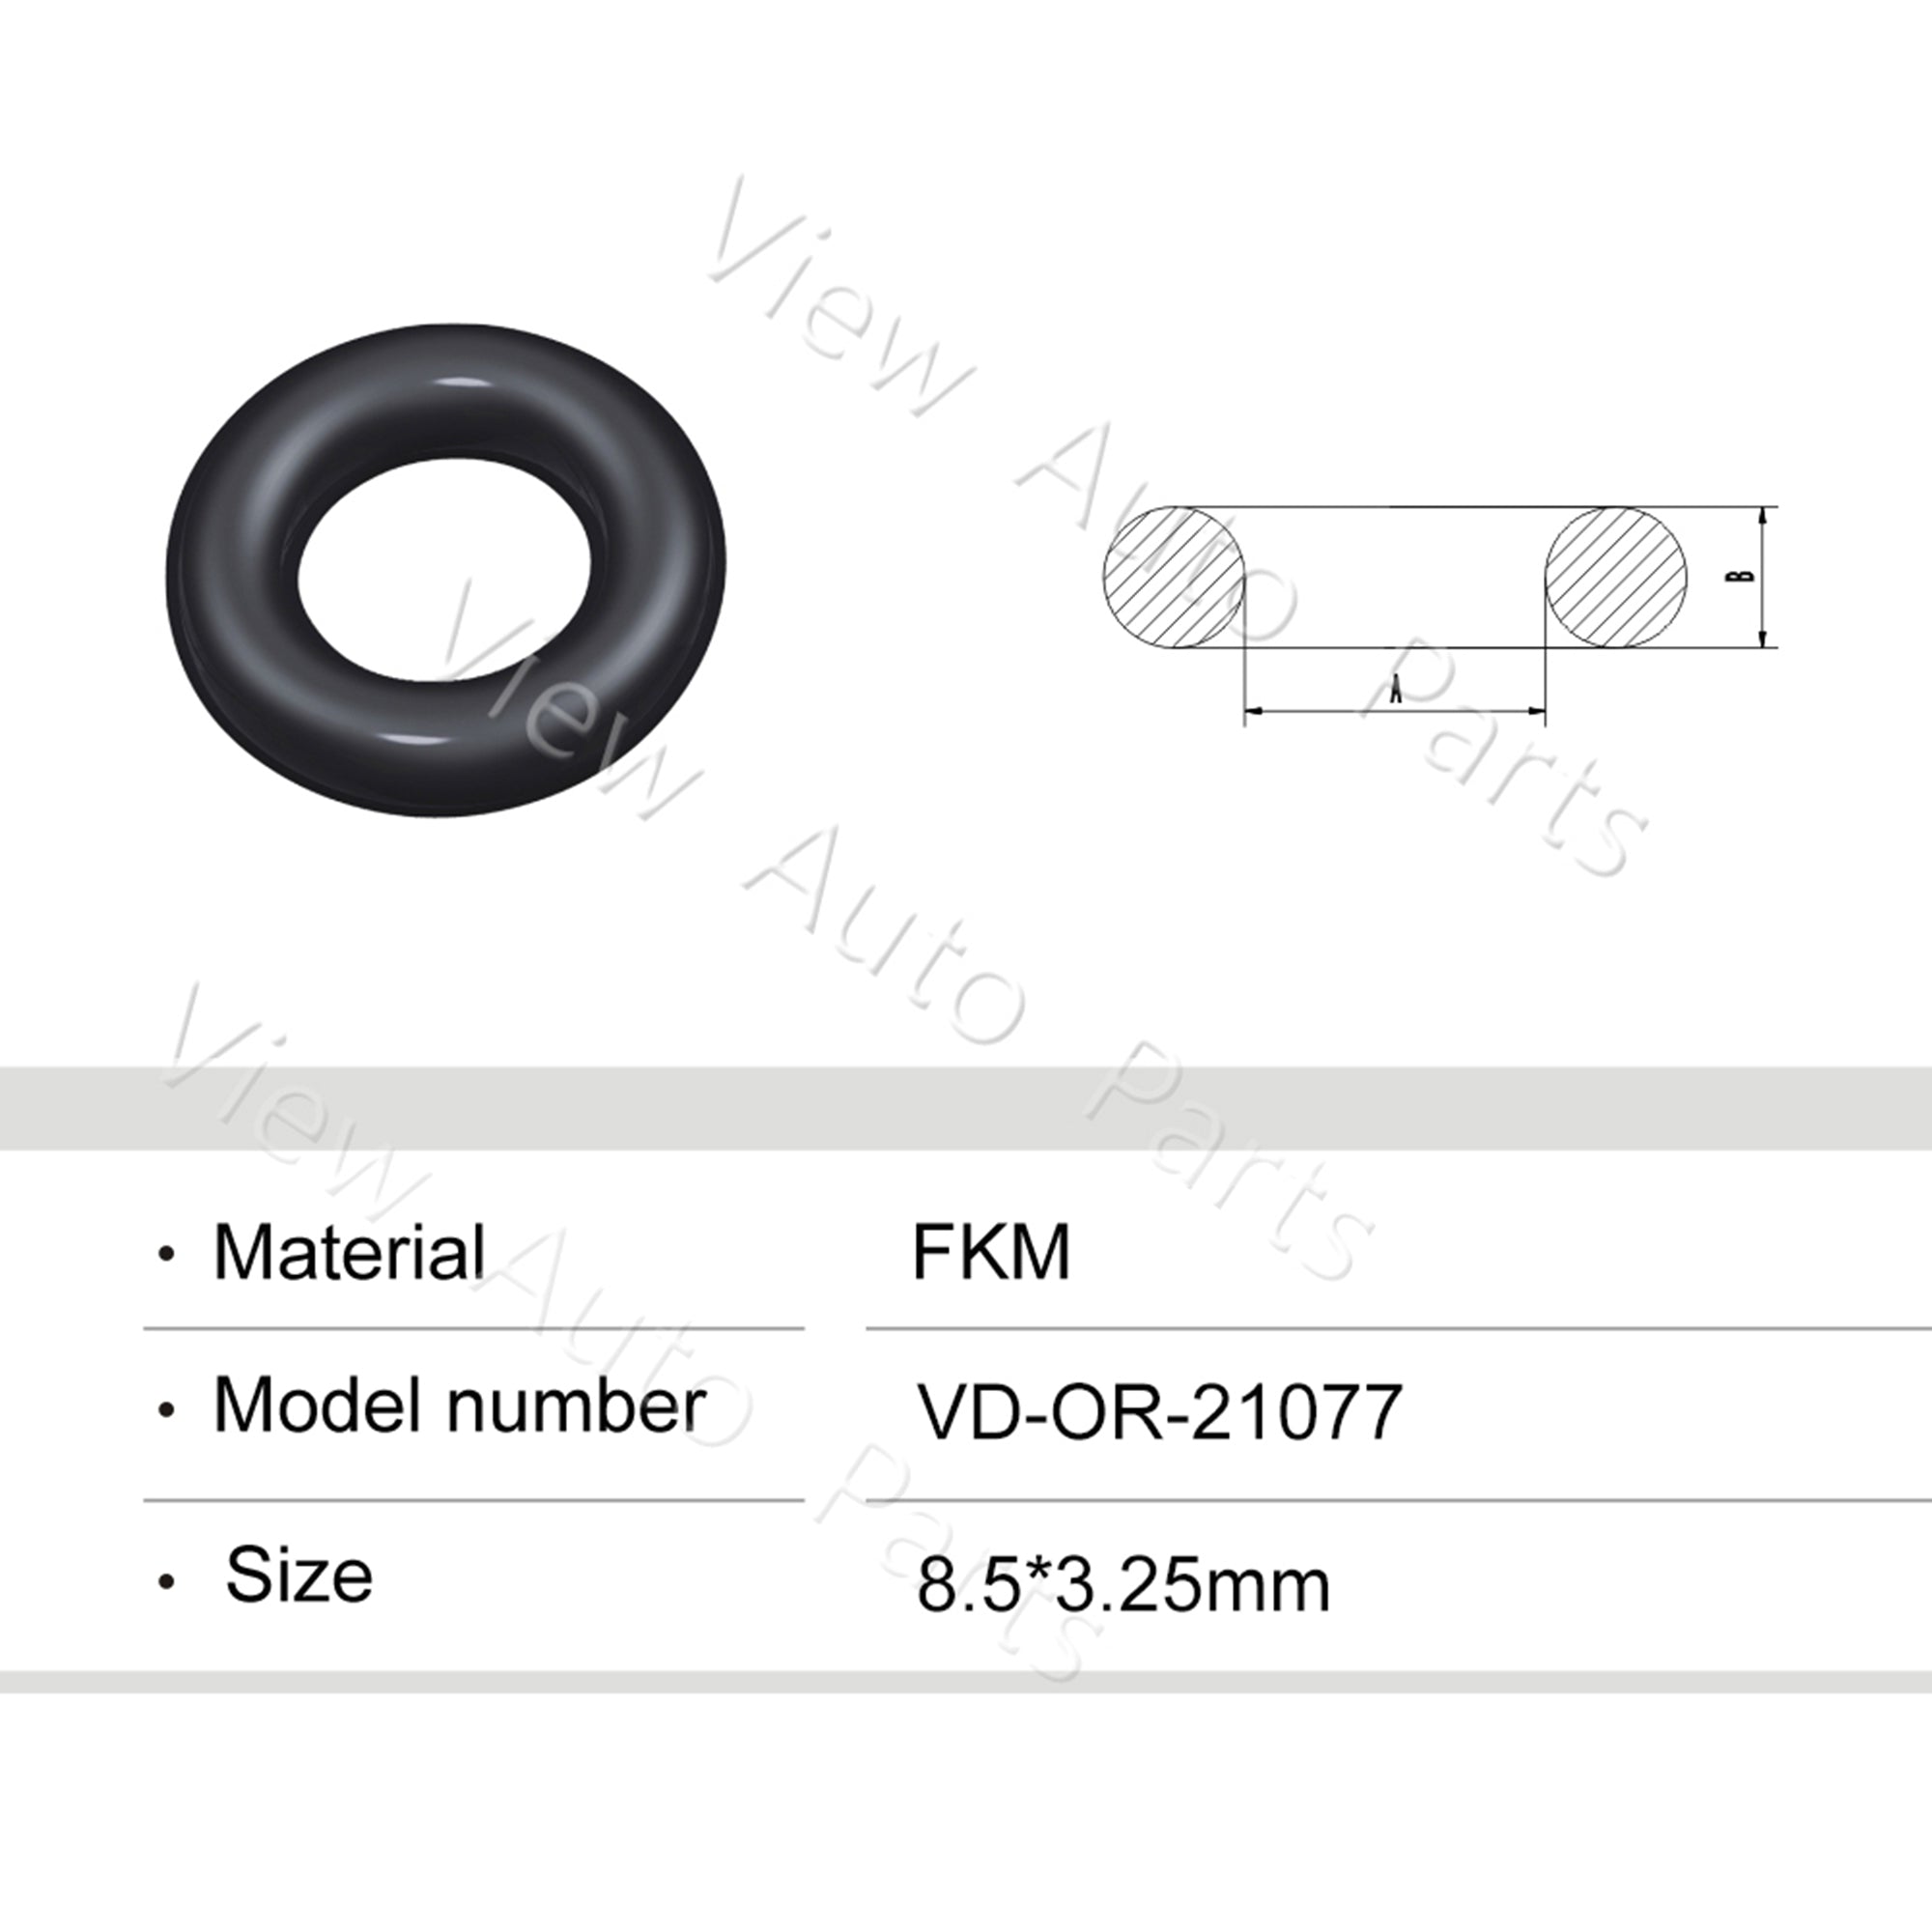 Fuel Injector Rubber Seal Orings for Fuel Injector Repair Kits FKM & Rubber Heat Resistant, Size: 8.5*3.25mm OR-21077